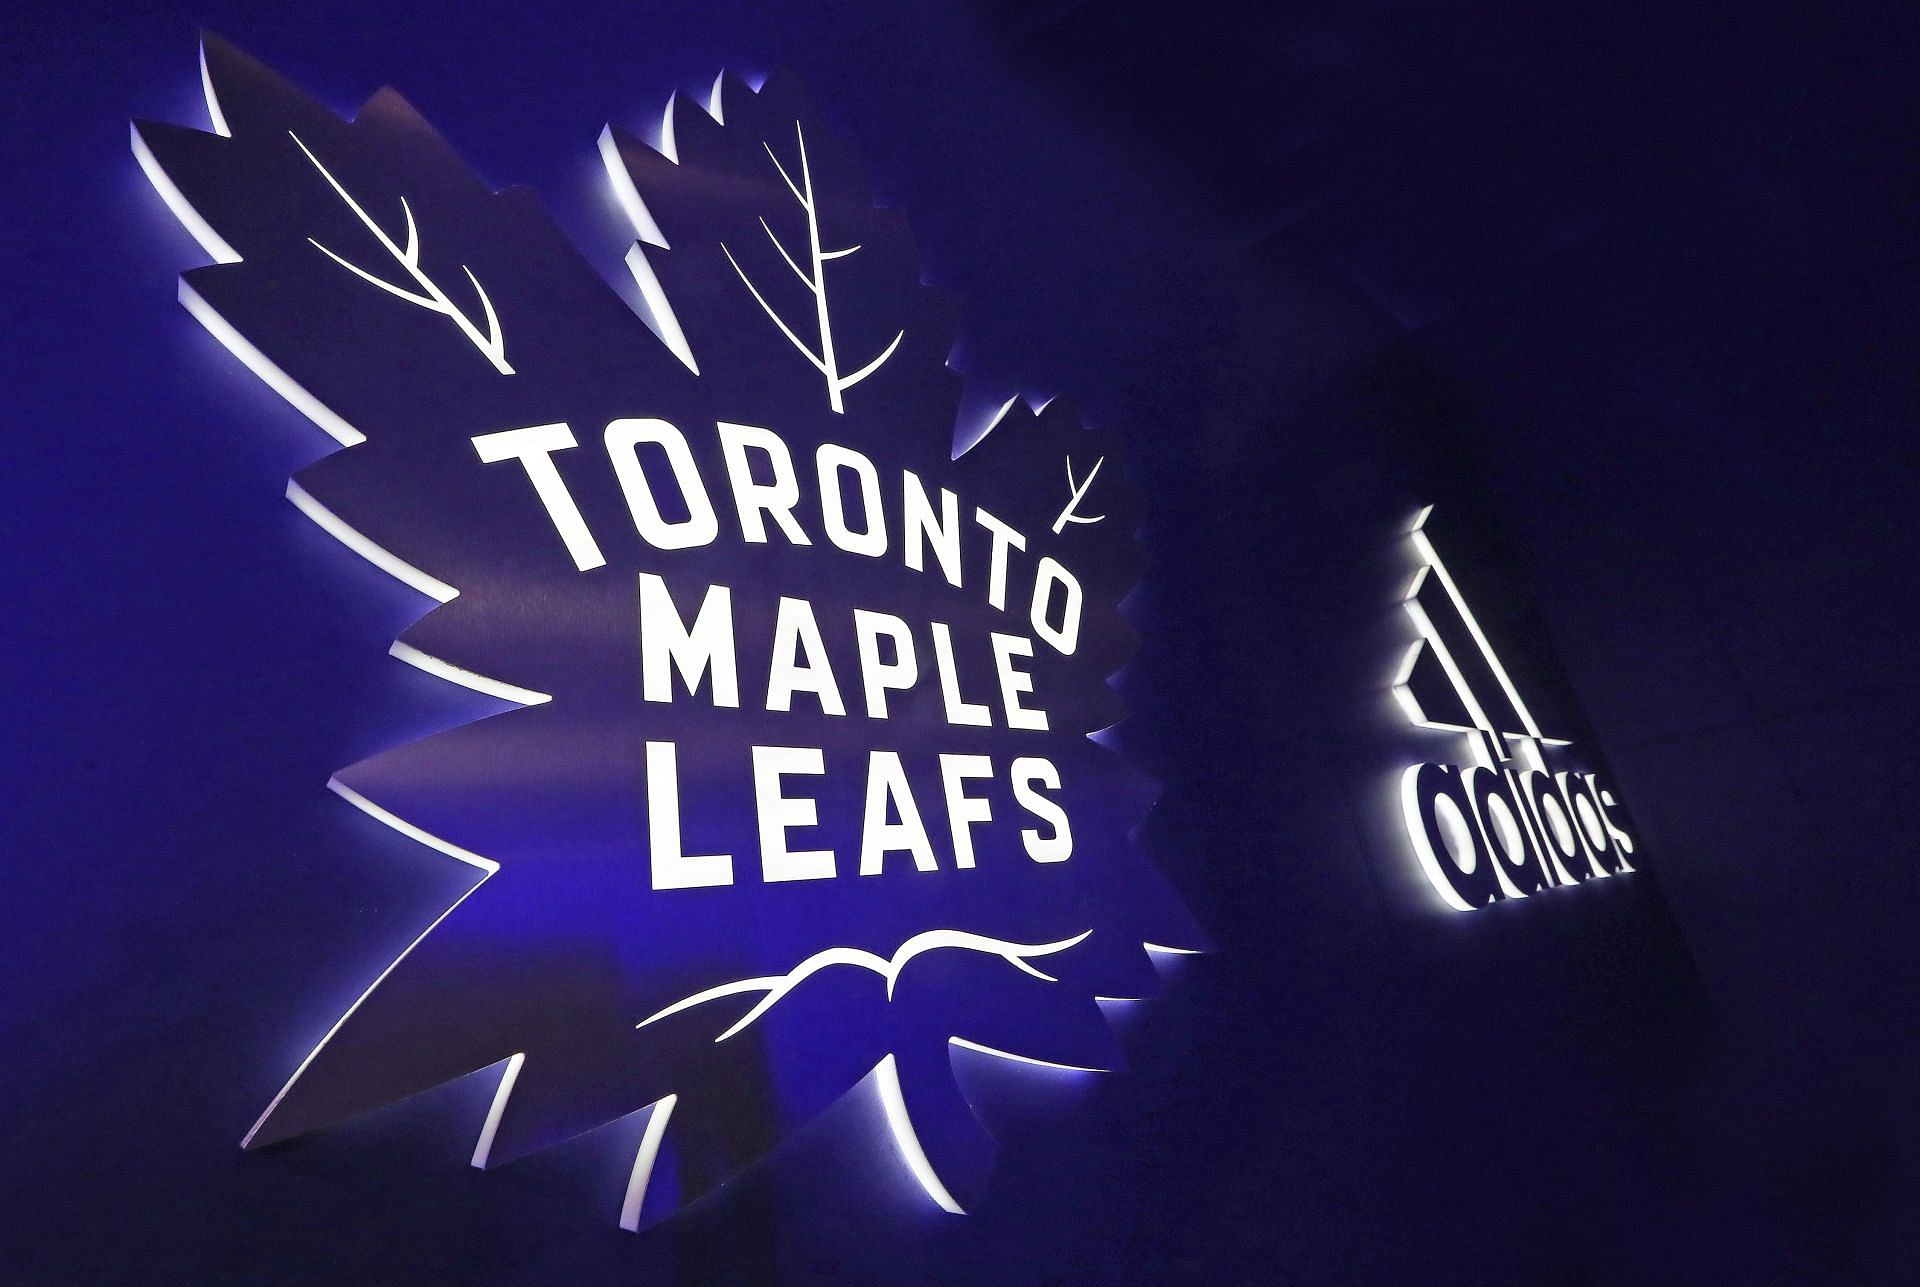 A Detailed Look at Some Troubling Trends for the Toronto Maple